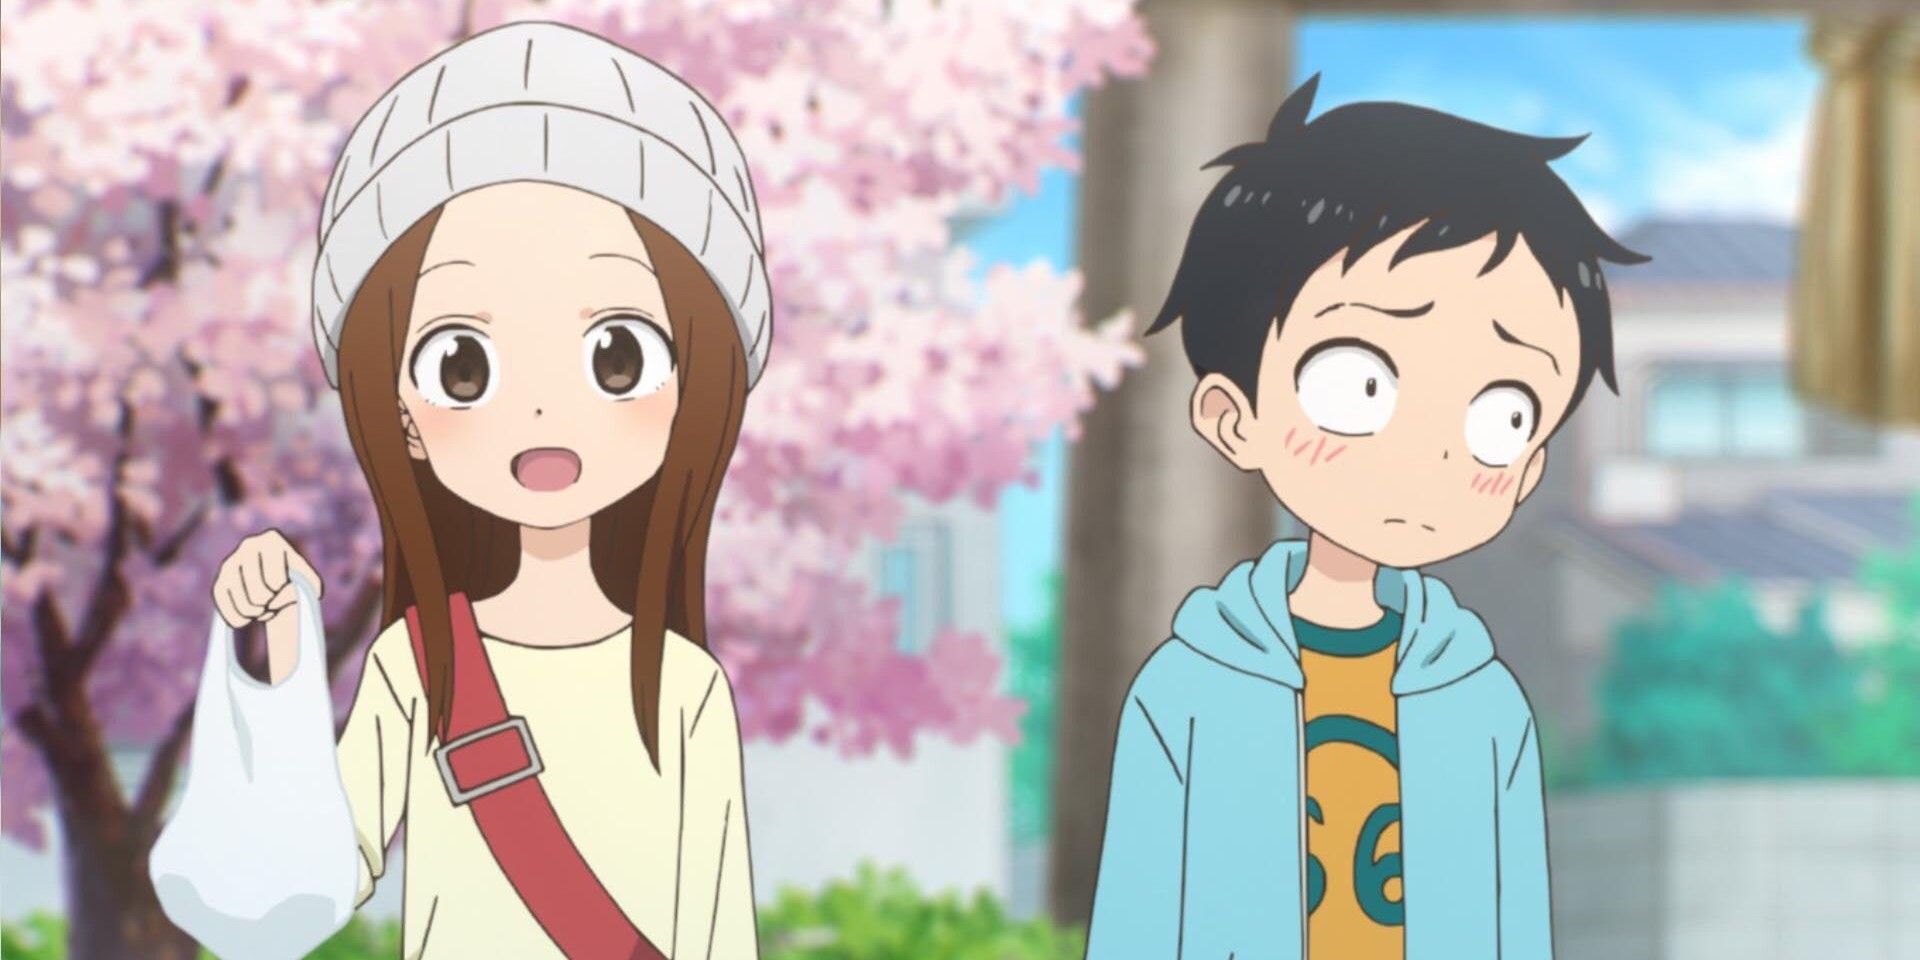 Takagi and Nishikata arrive for the flower viewing with snacks